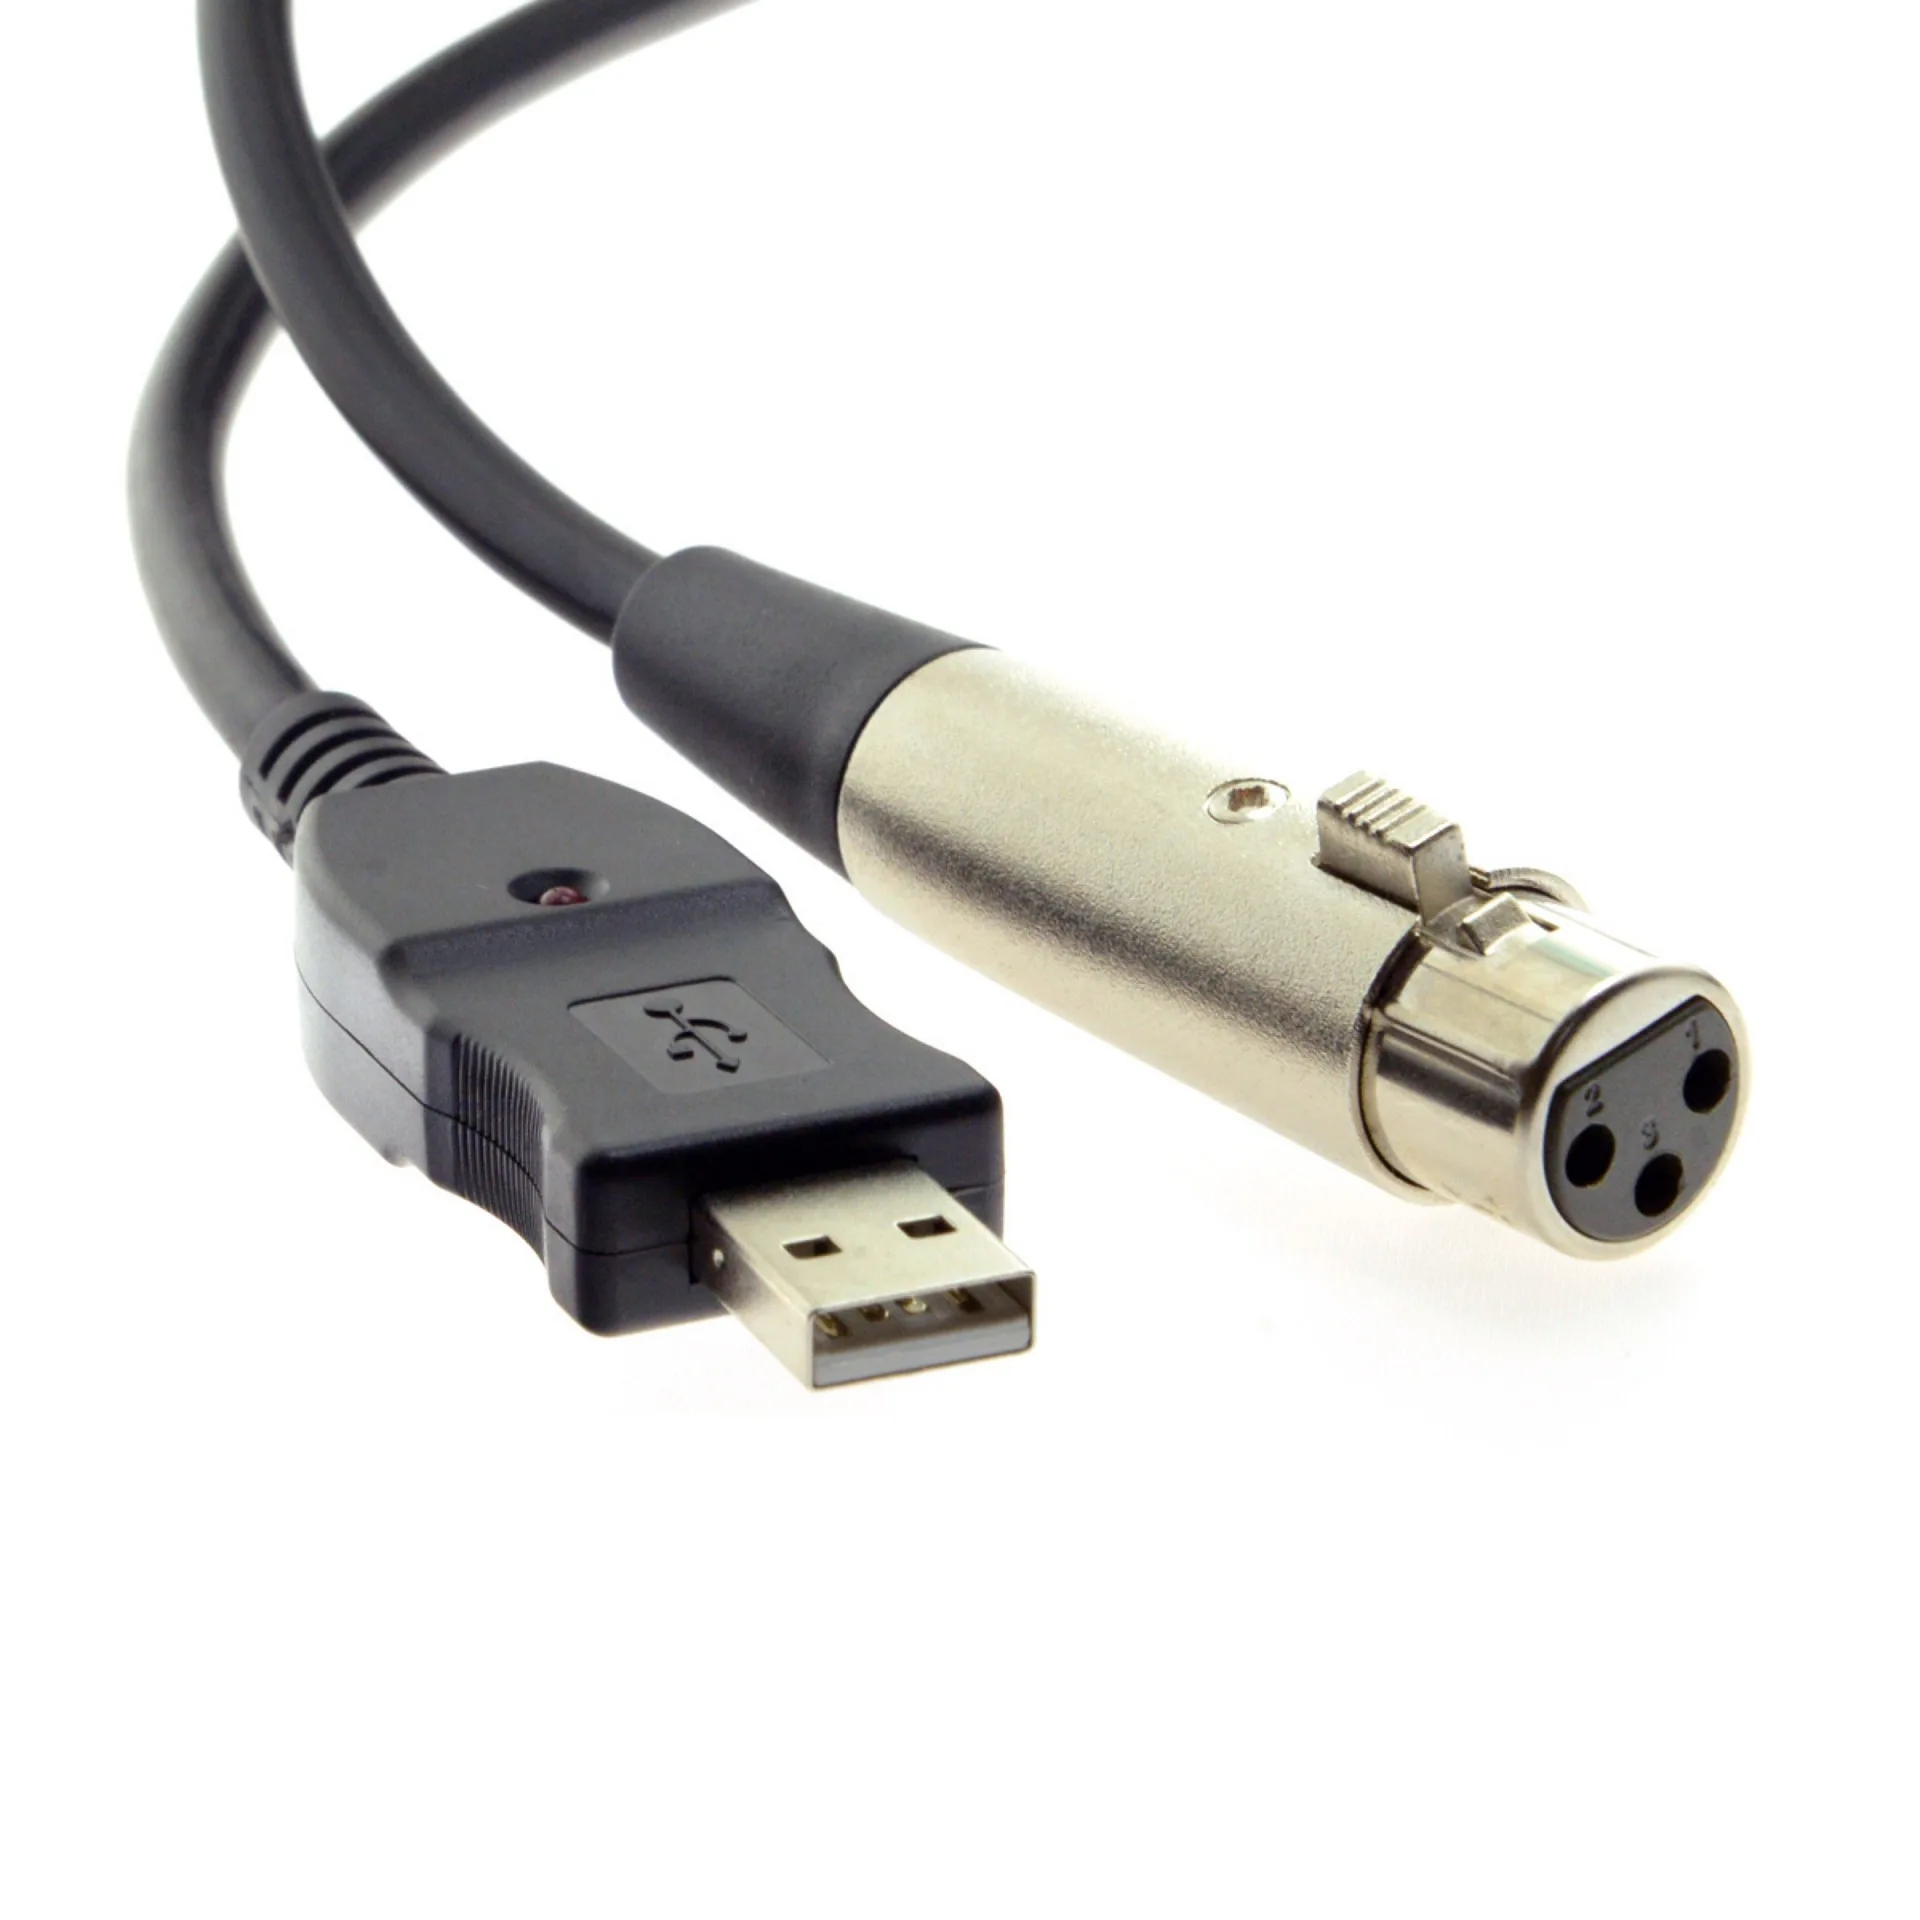 antyder elasticitet At søge tilflugt Usb To Xlr Usb Microphone Cable For Recording 3m Usb To Xlr Cable - Buy Xlr  Cable,Xlr Cable Female Usb,Usb To Round Connector Cable Product on  Alibaba.com